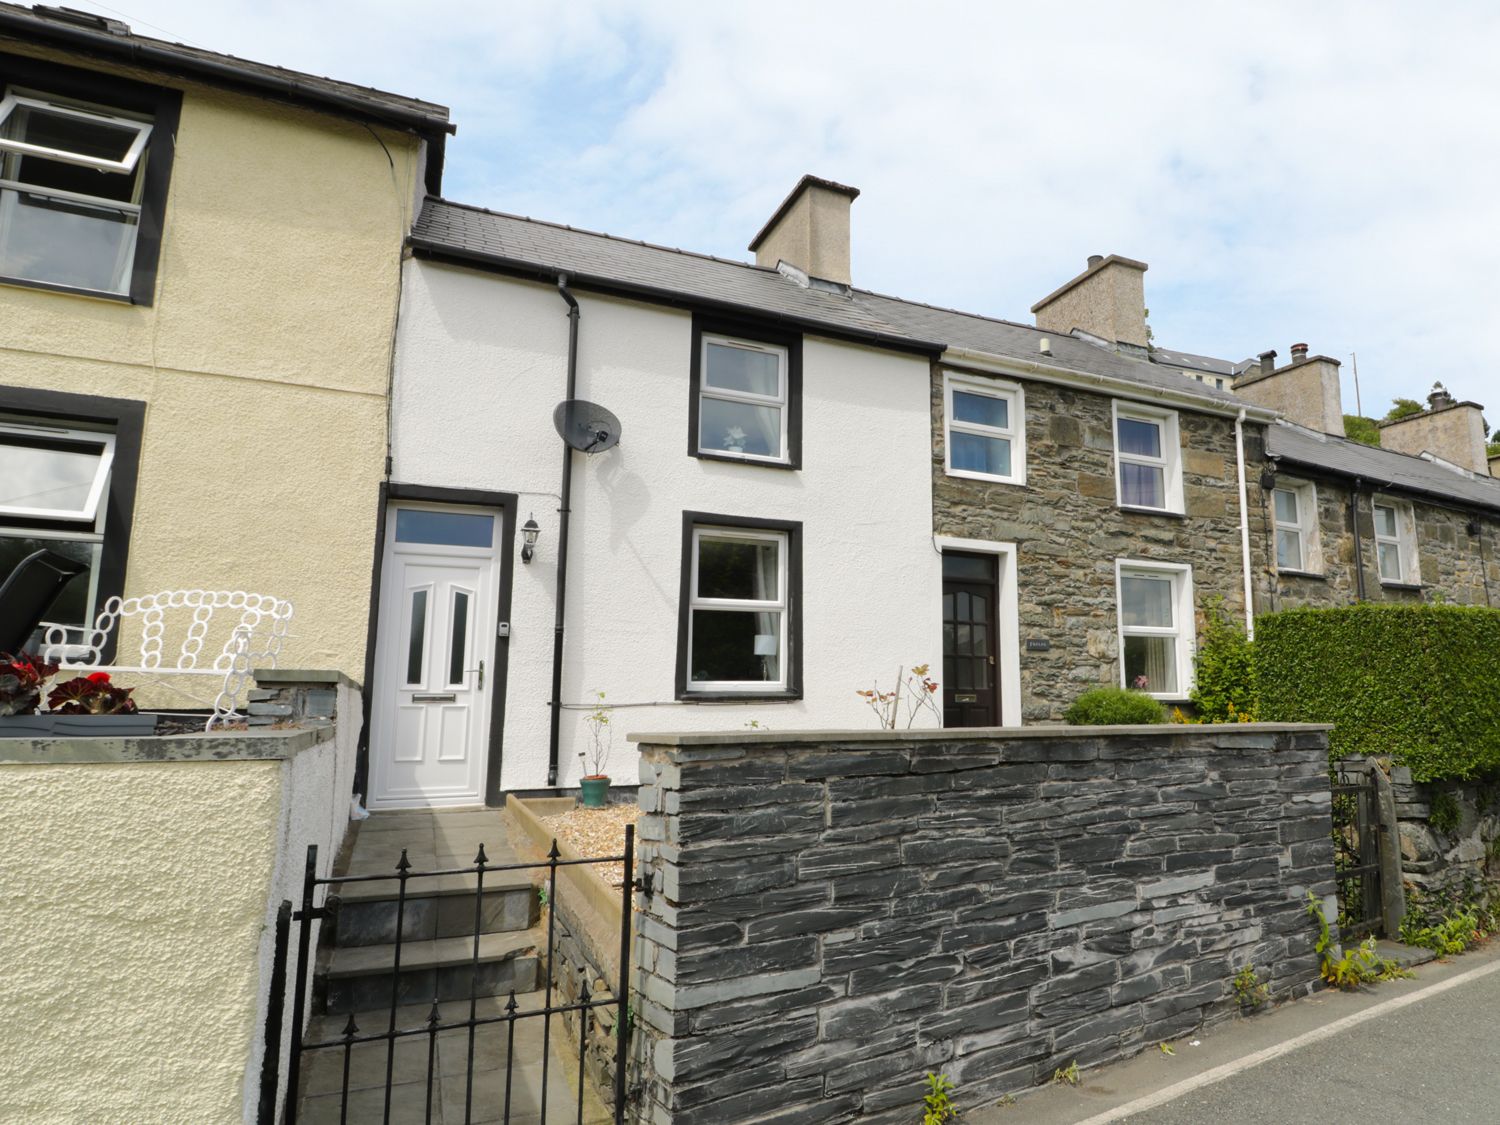 2 Holland Terrace - North Wales - 963317 - photo 1